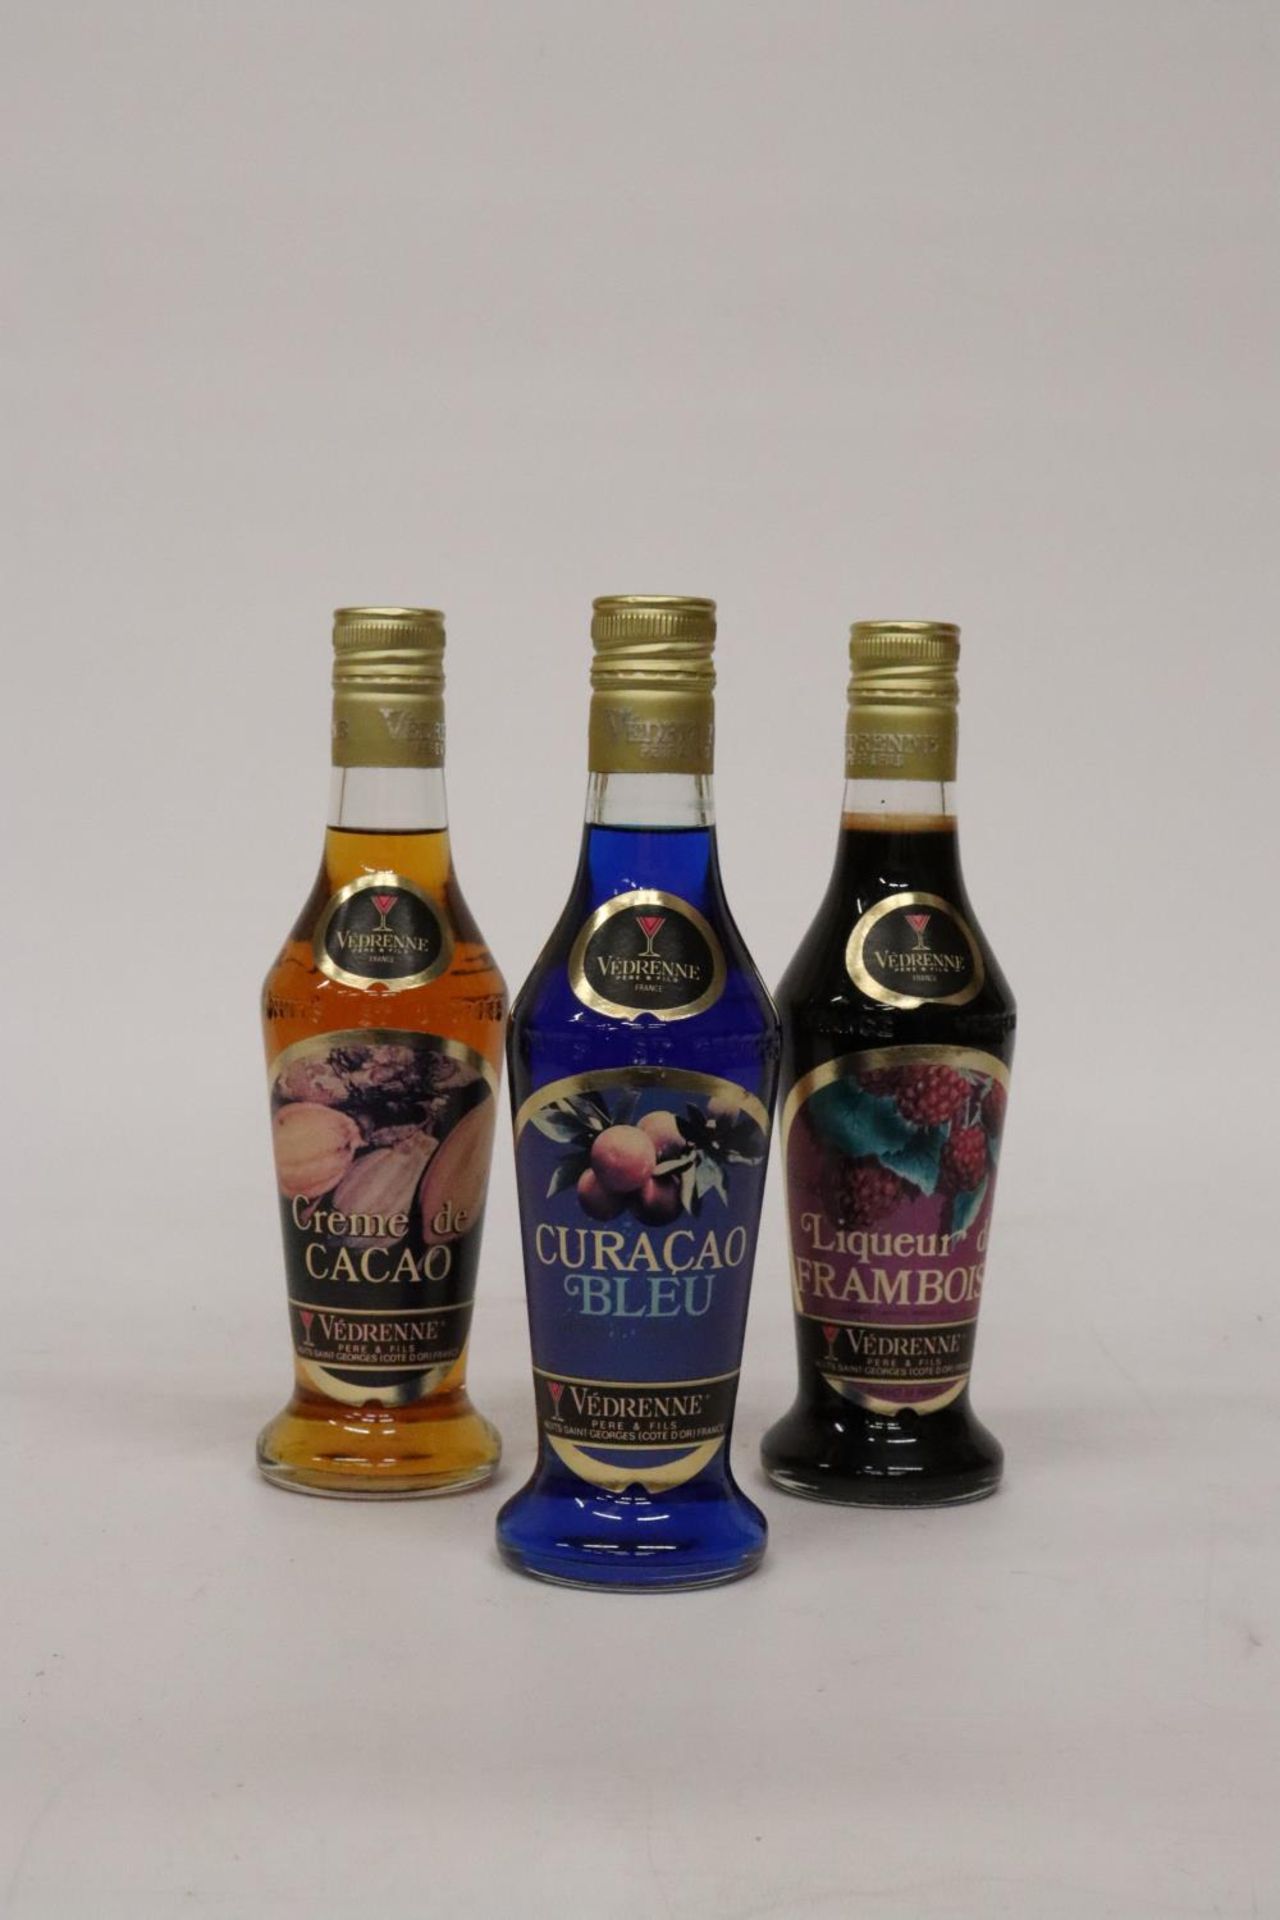 THREE BOTTLES OF VEDRENNE LIQUEUR TO INCLUDE A CURACOA BLEU, A CREME DE CACOA AND A FRAMBOISE